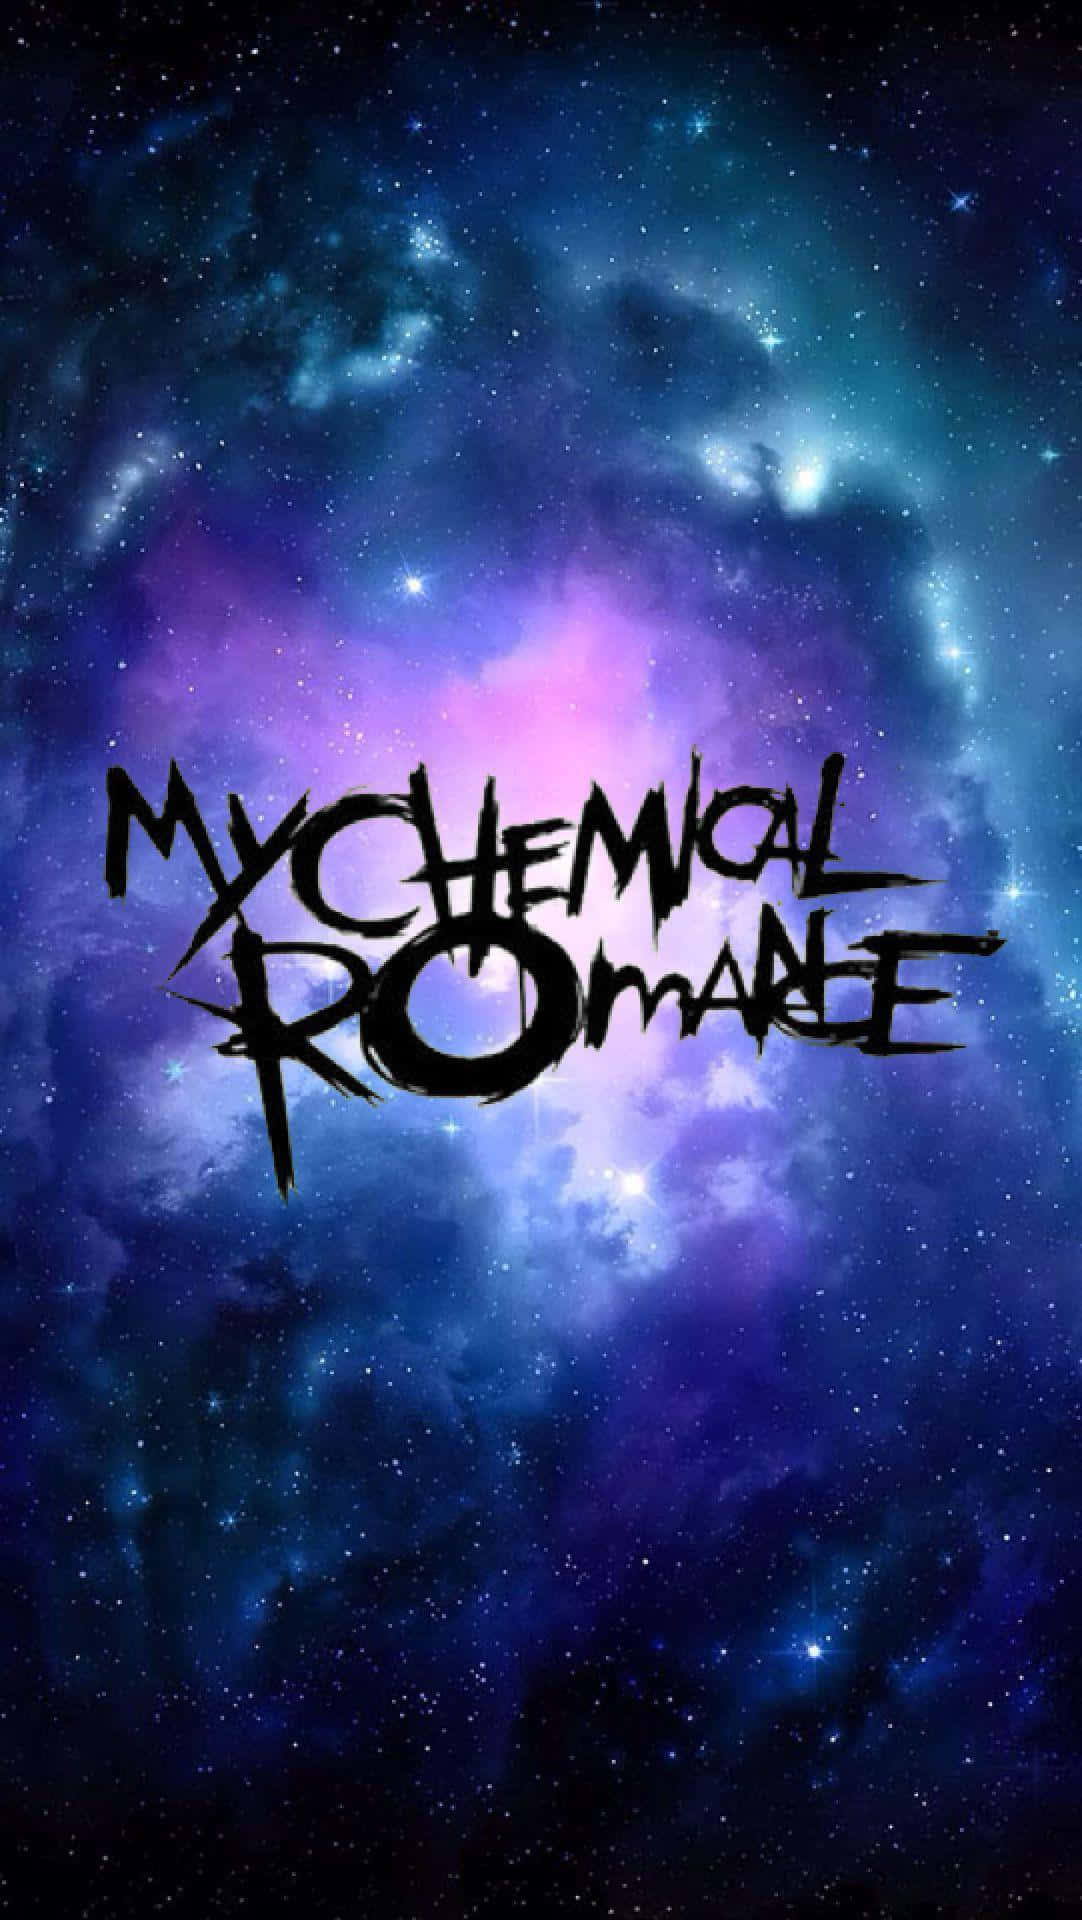 My Chemical Romance - iconic band members and logo Wallpaper